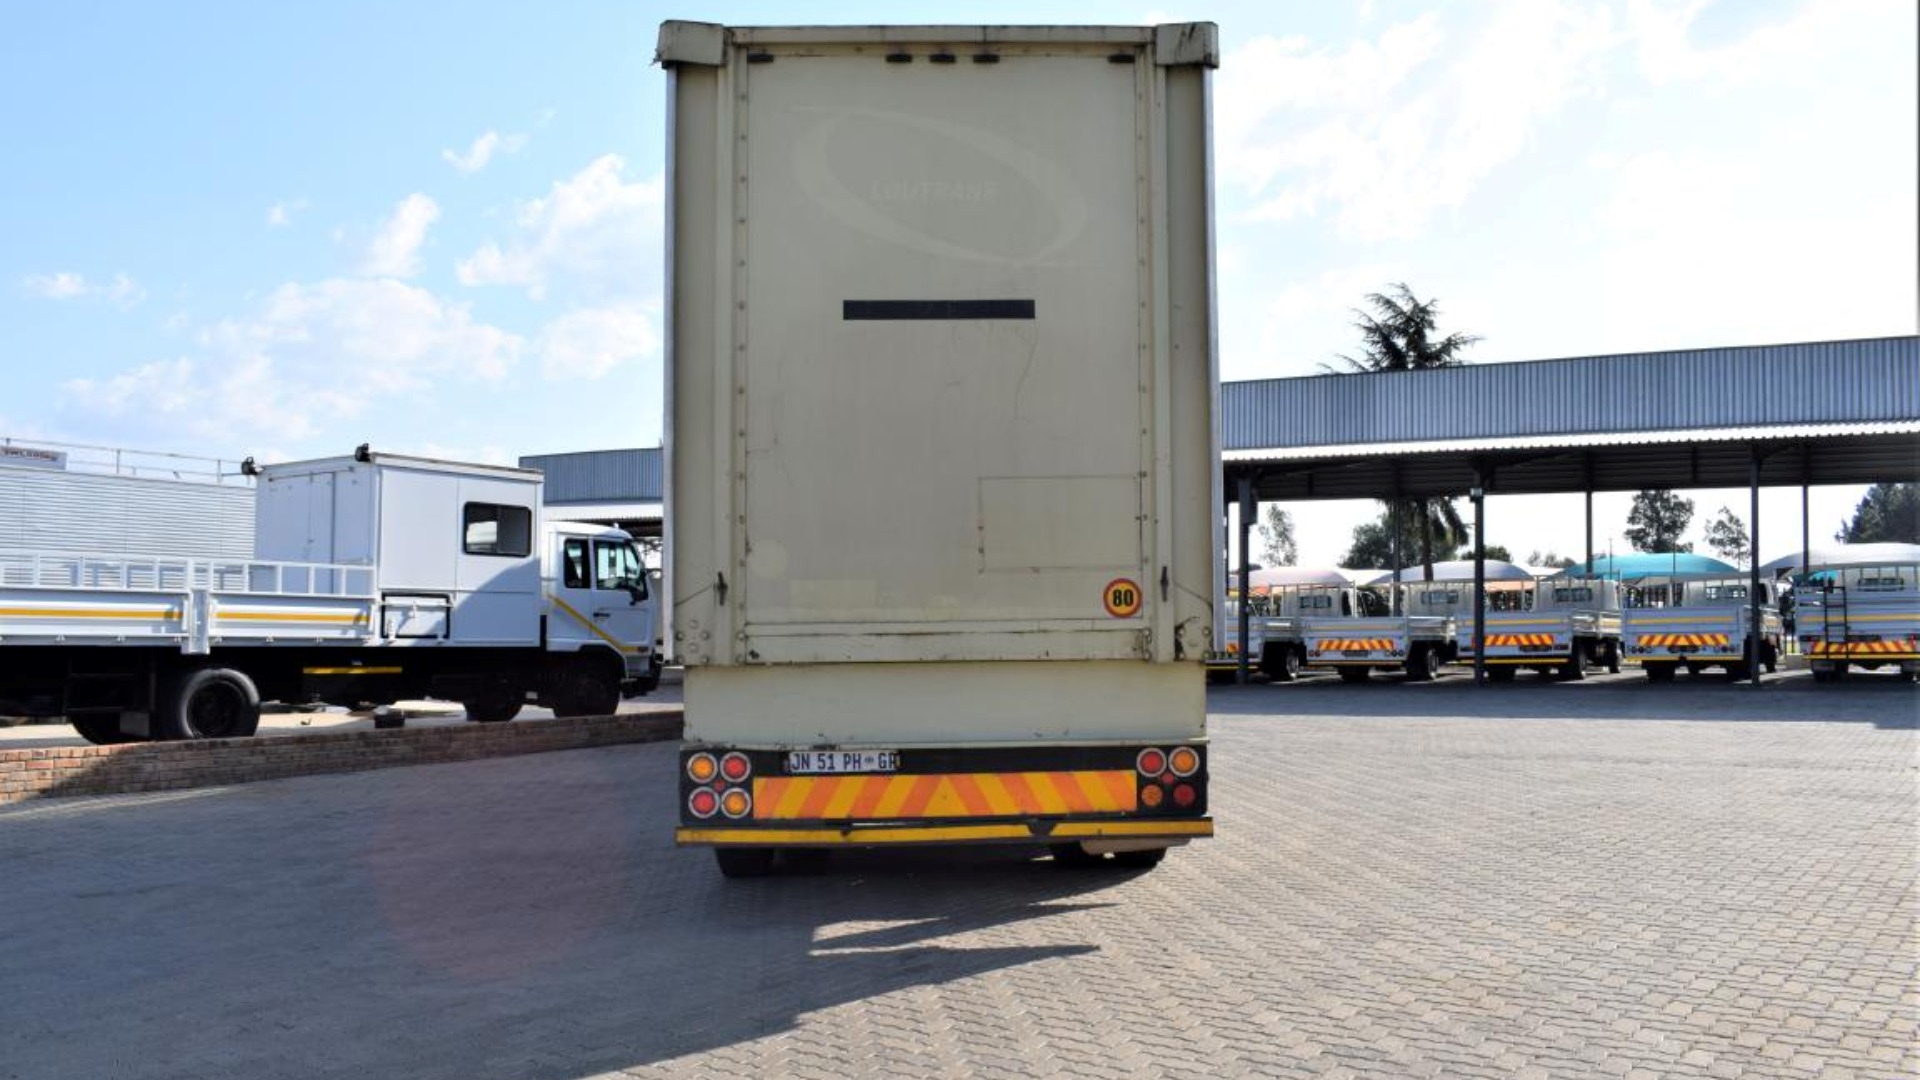 SA Truck Bodies Trailers TAUTLINER SUPER LINK Curtain Side 2005 for sale by Pristine Motors Trucks | Truck & Trailer Marketplaces